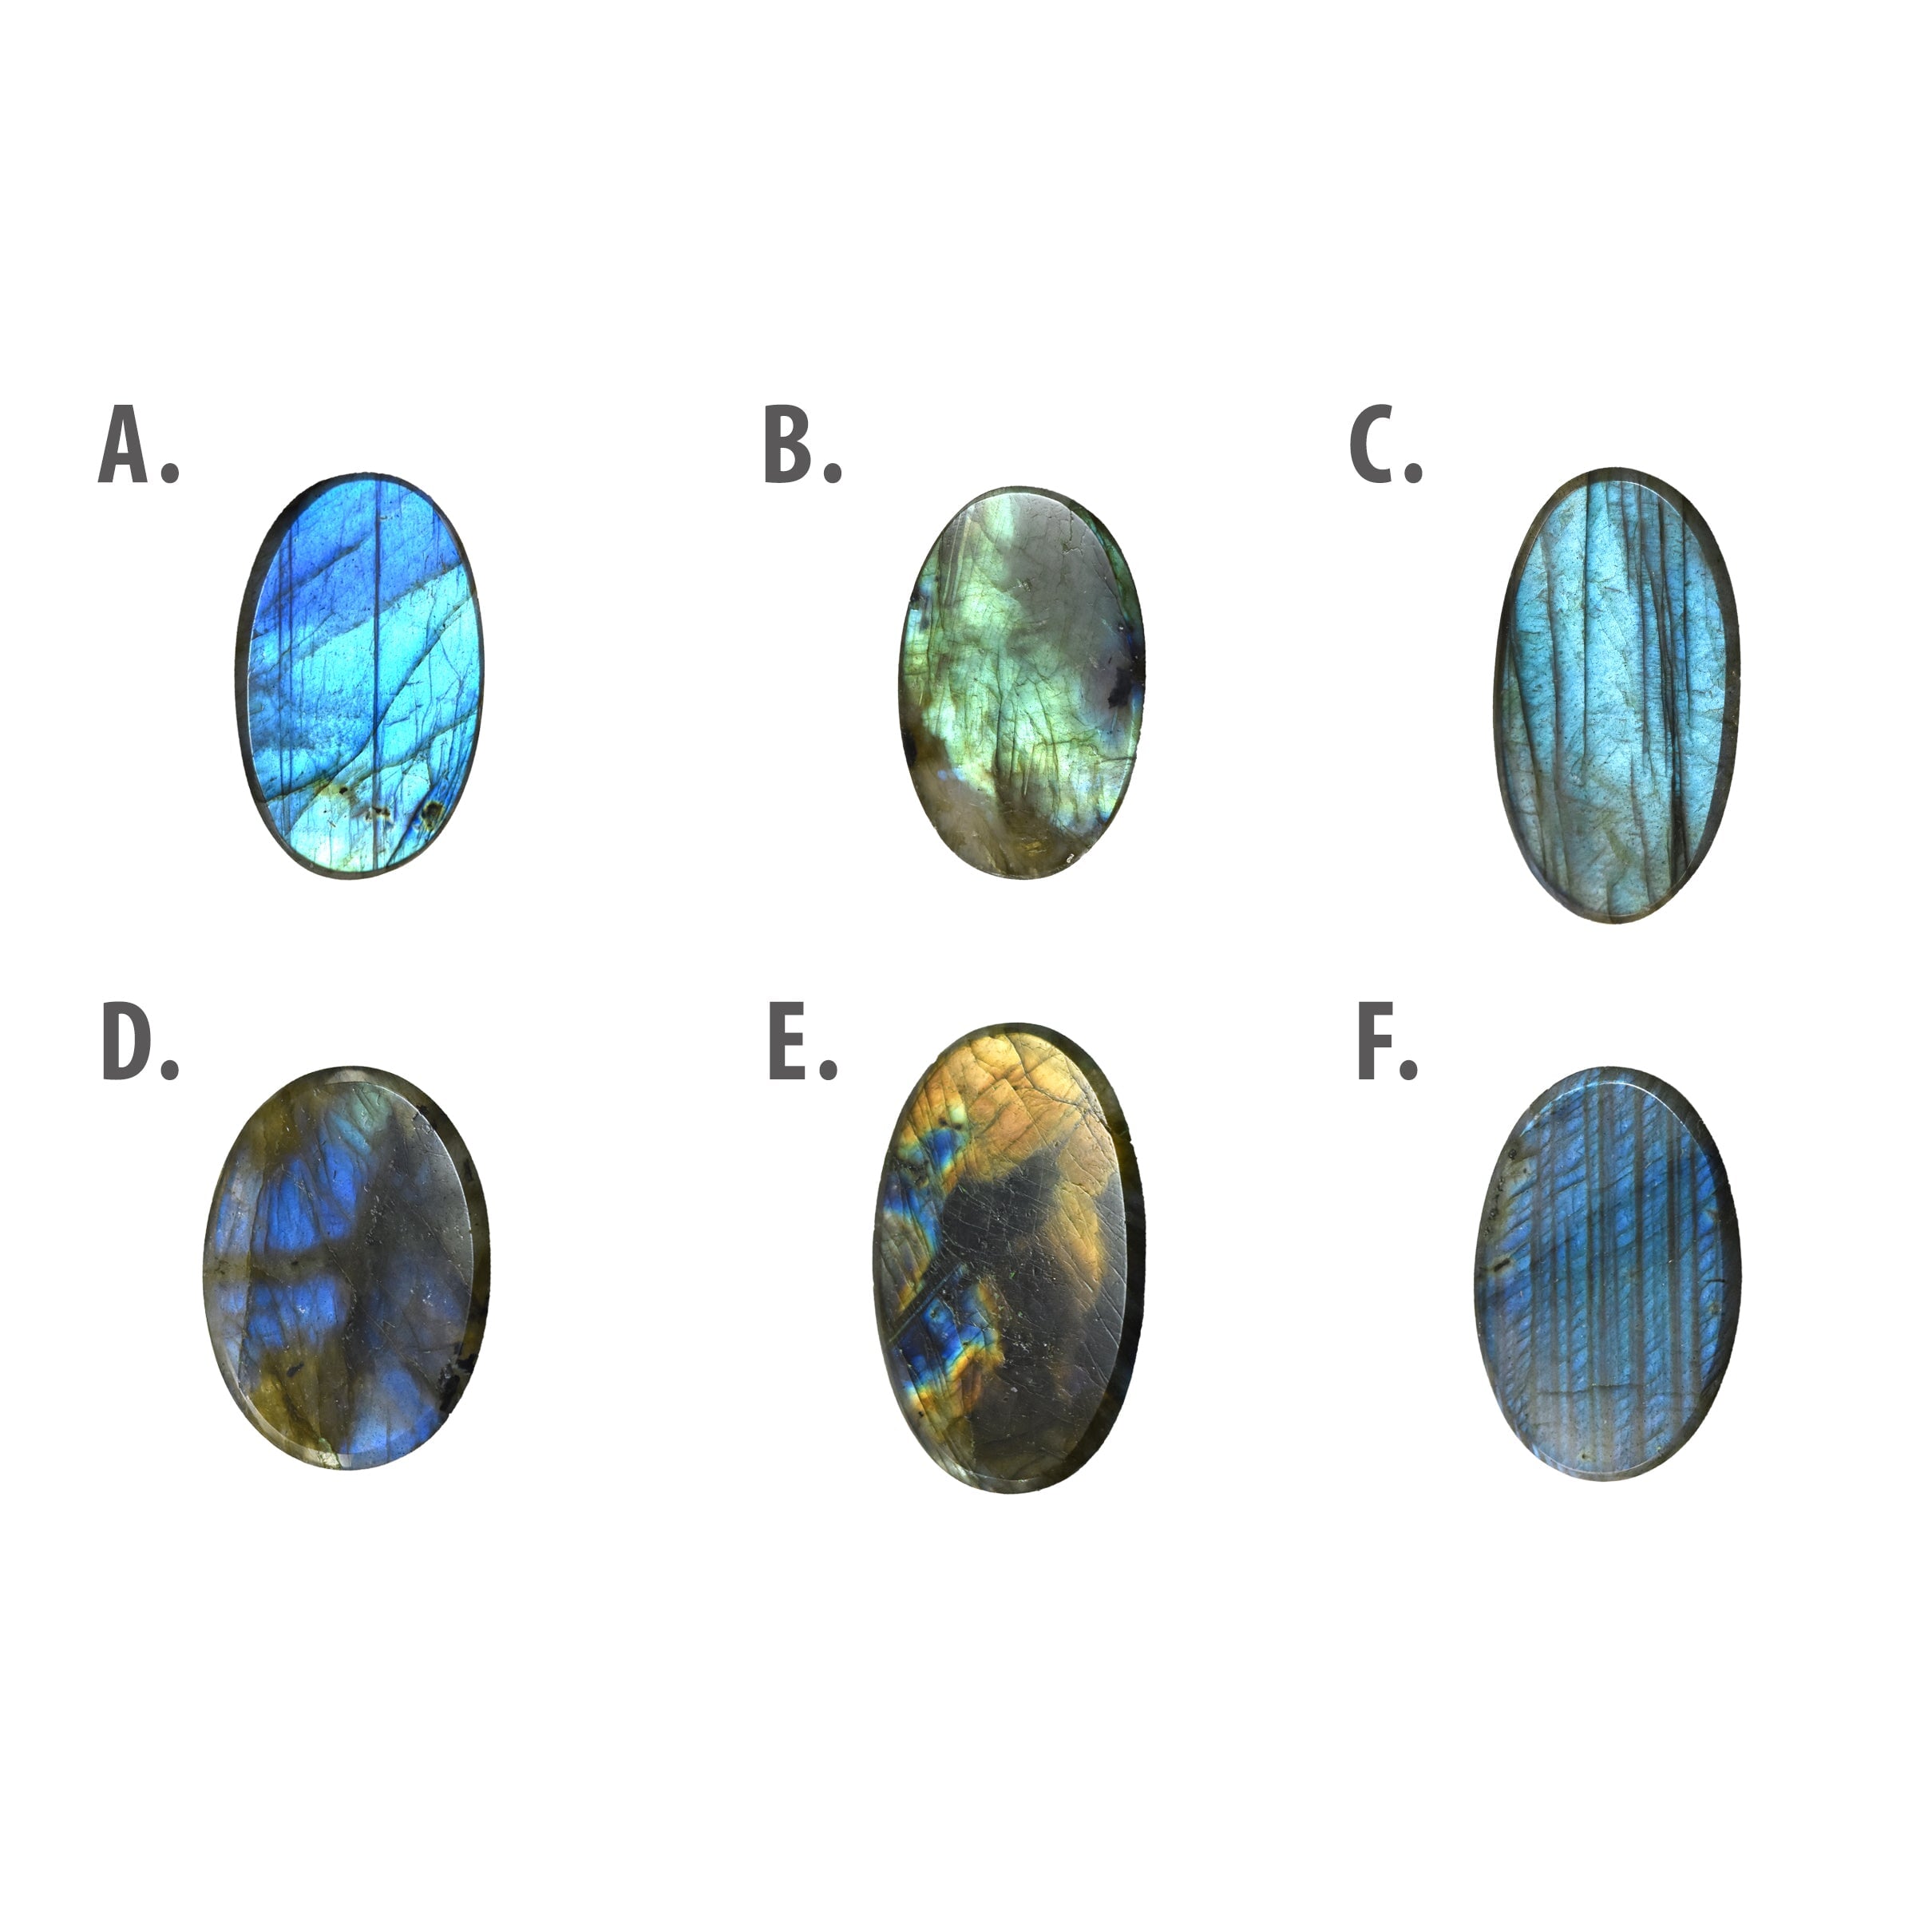 Choose Your Own Reversible Northern Lights Labradorite Fox Pendant - Silver Pendant Stone A - 31 x 18mm Stone B - 30 x 19mm 7114 - handmade by Beth Millner Jewelry